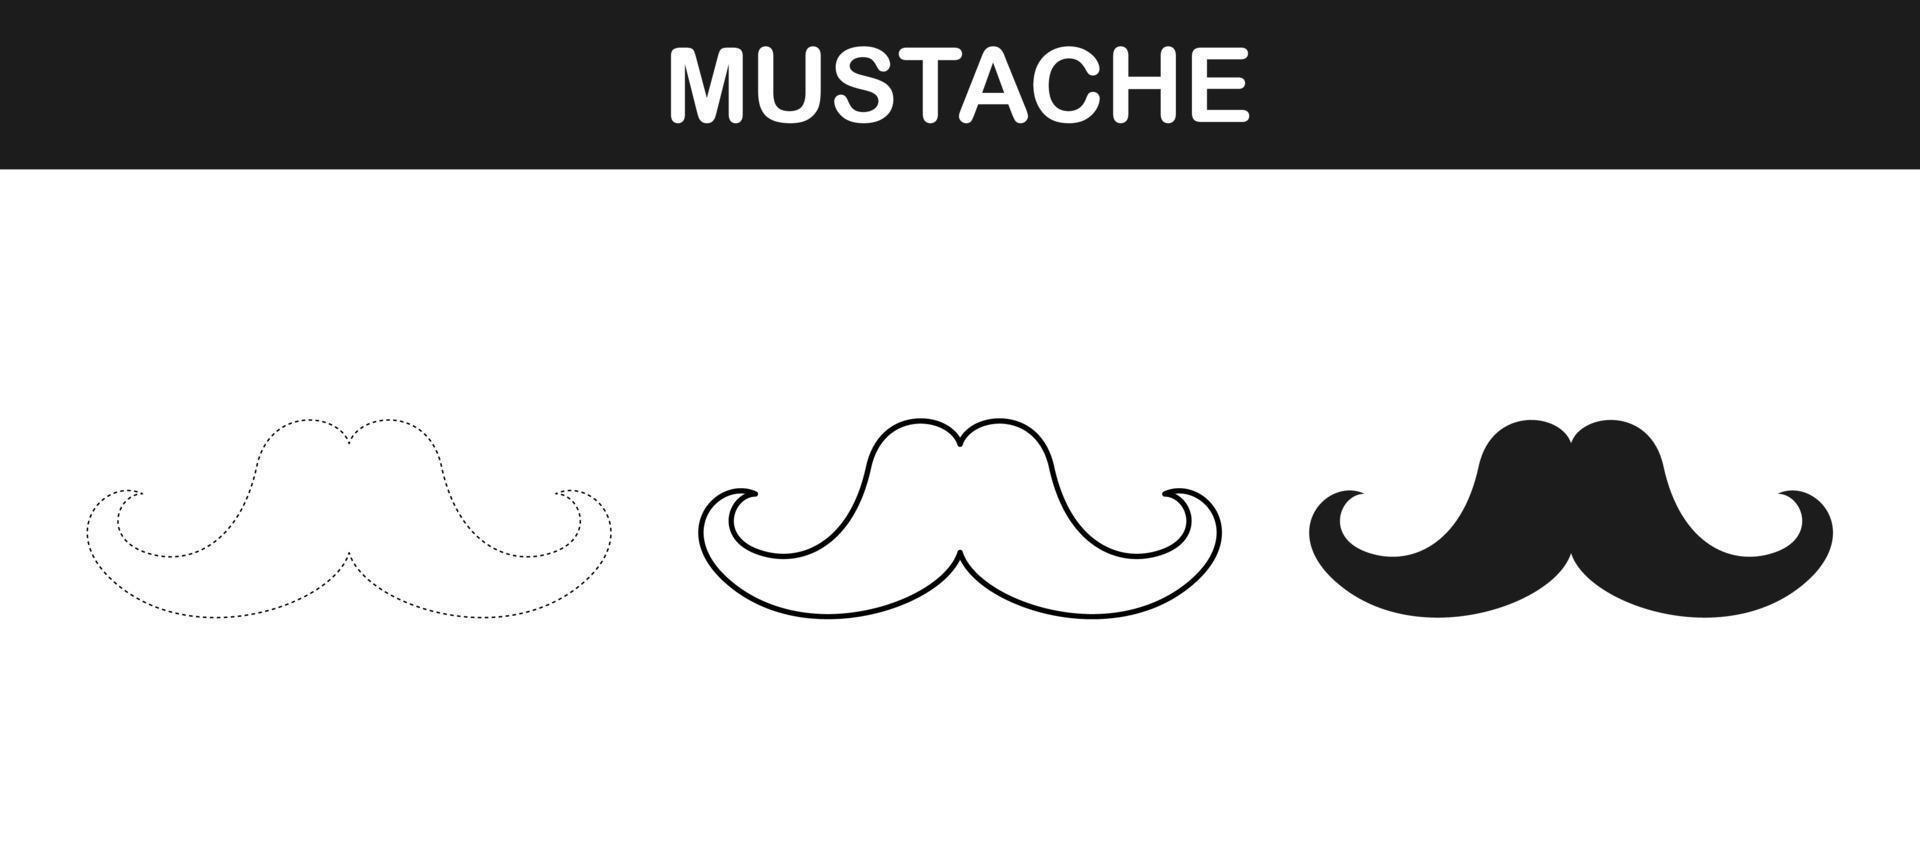 Mustache tracing and coloring worksheet for kids vector